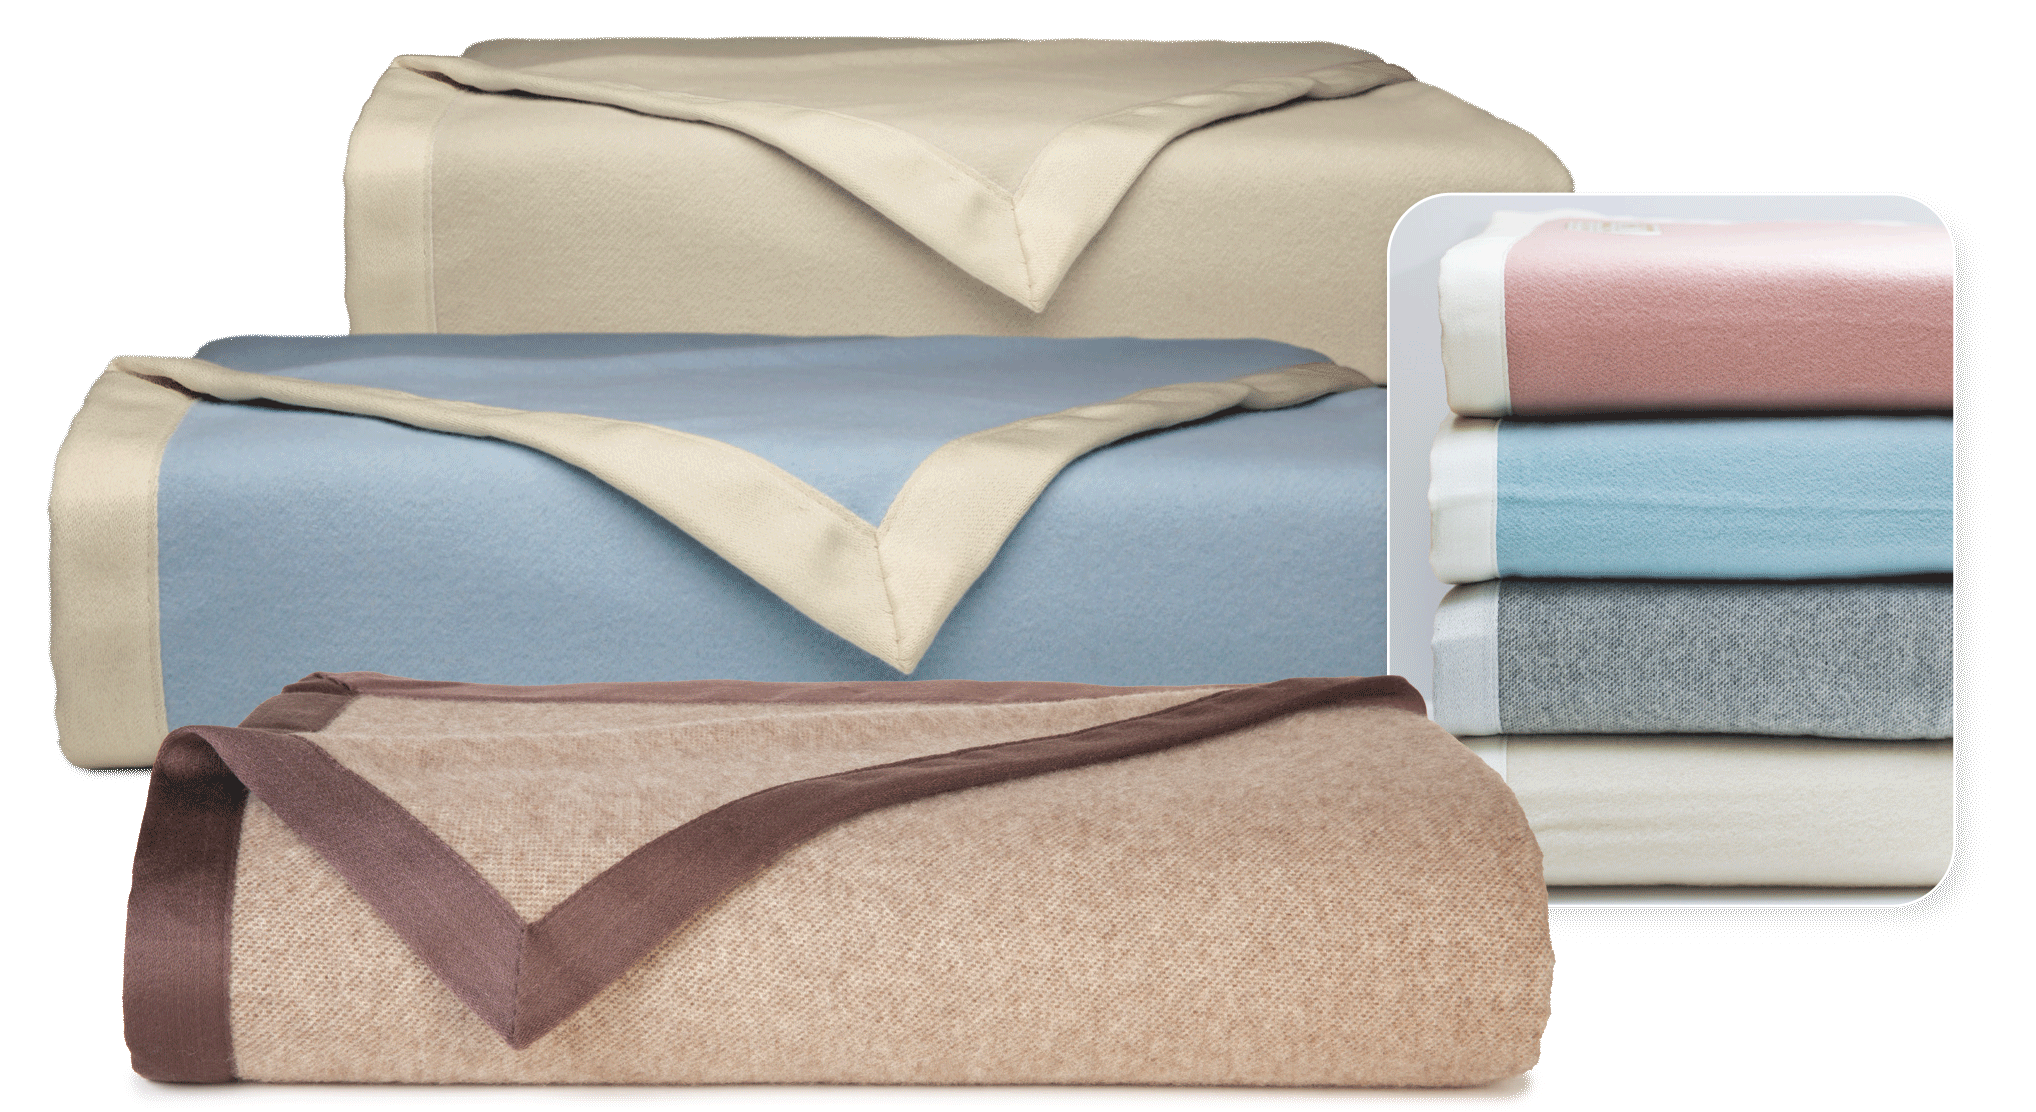 image of Tribeca blankets Includes Inset of Baby Blankets